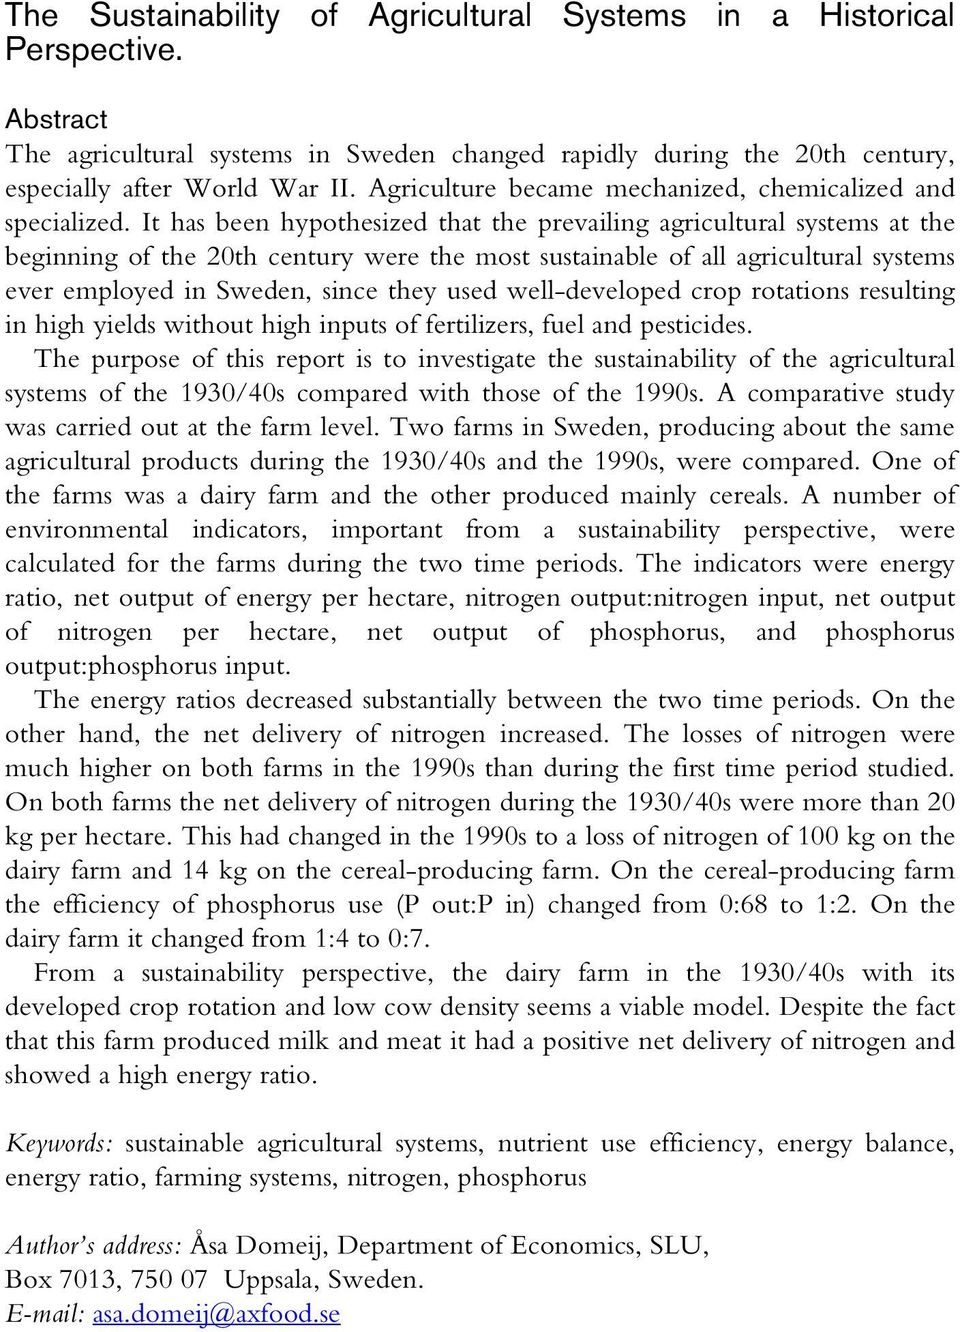 It has been hypothesized that the prevailing agricultural systems at the beginning of the 20th century were the most sustainable of all agricultural systems ever employed in Sweden, since they used